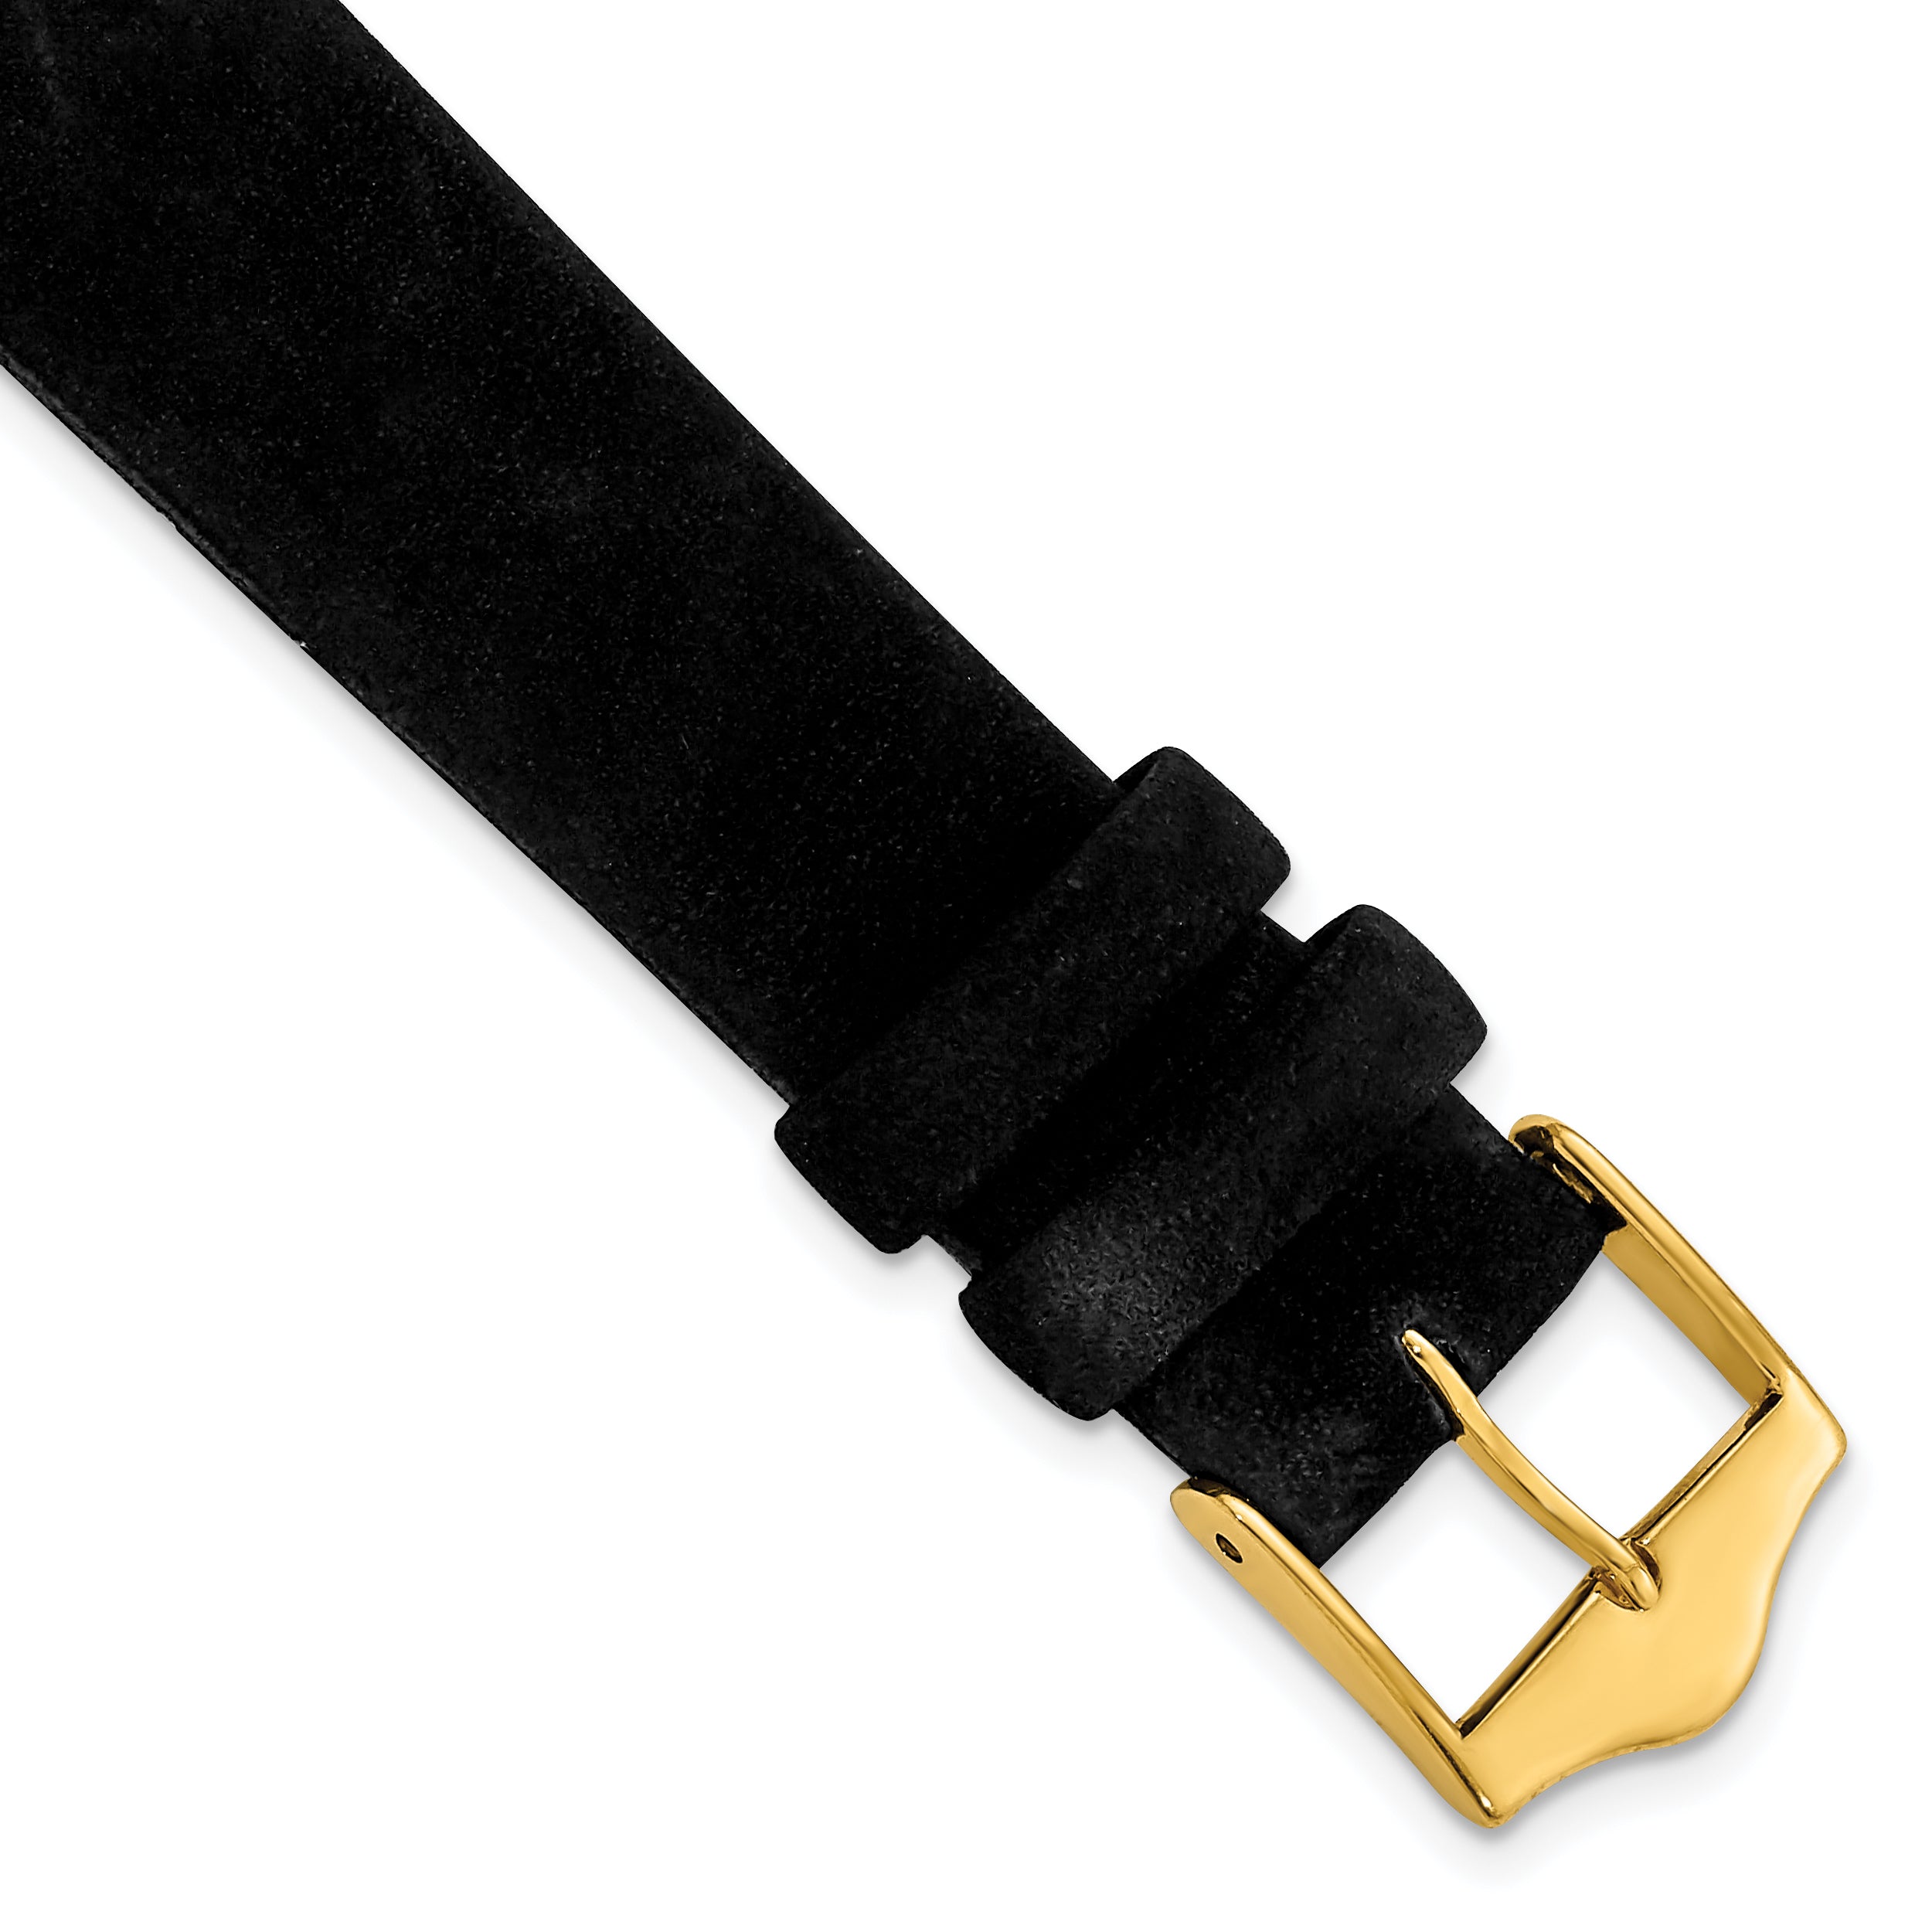 DeBeer 16mm Black Suede Flat Leather with Gold-tone Buckle 7.75 inch Watch Band